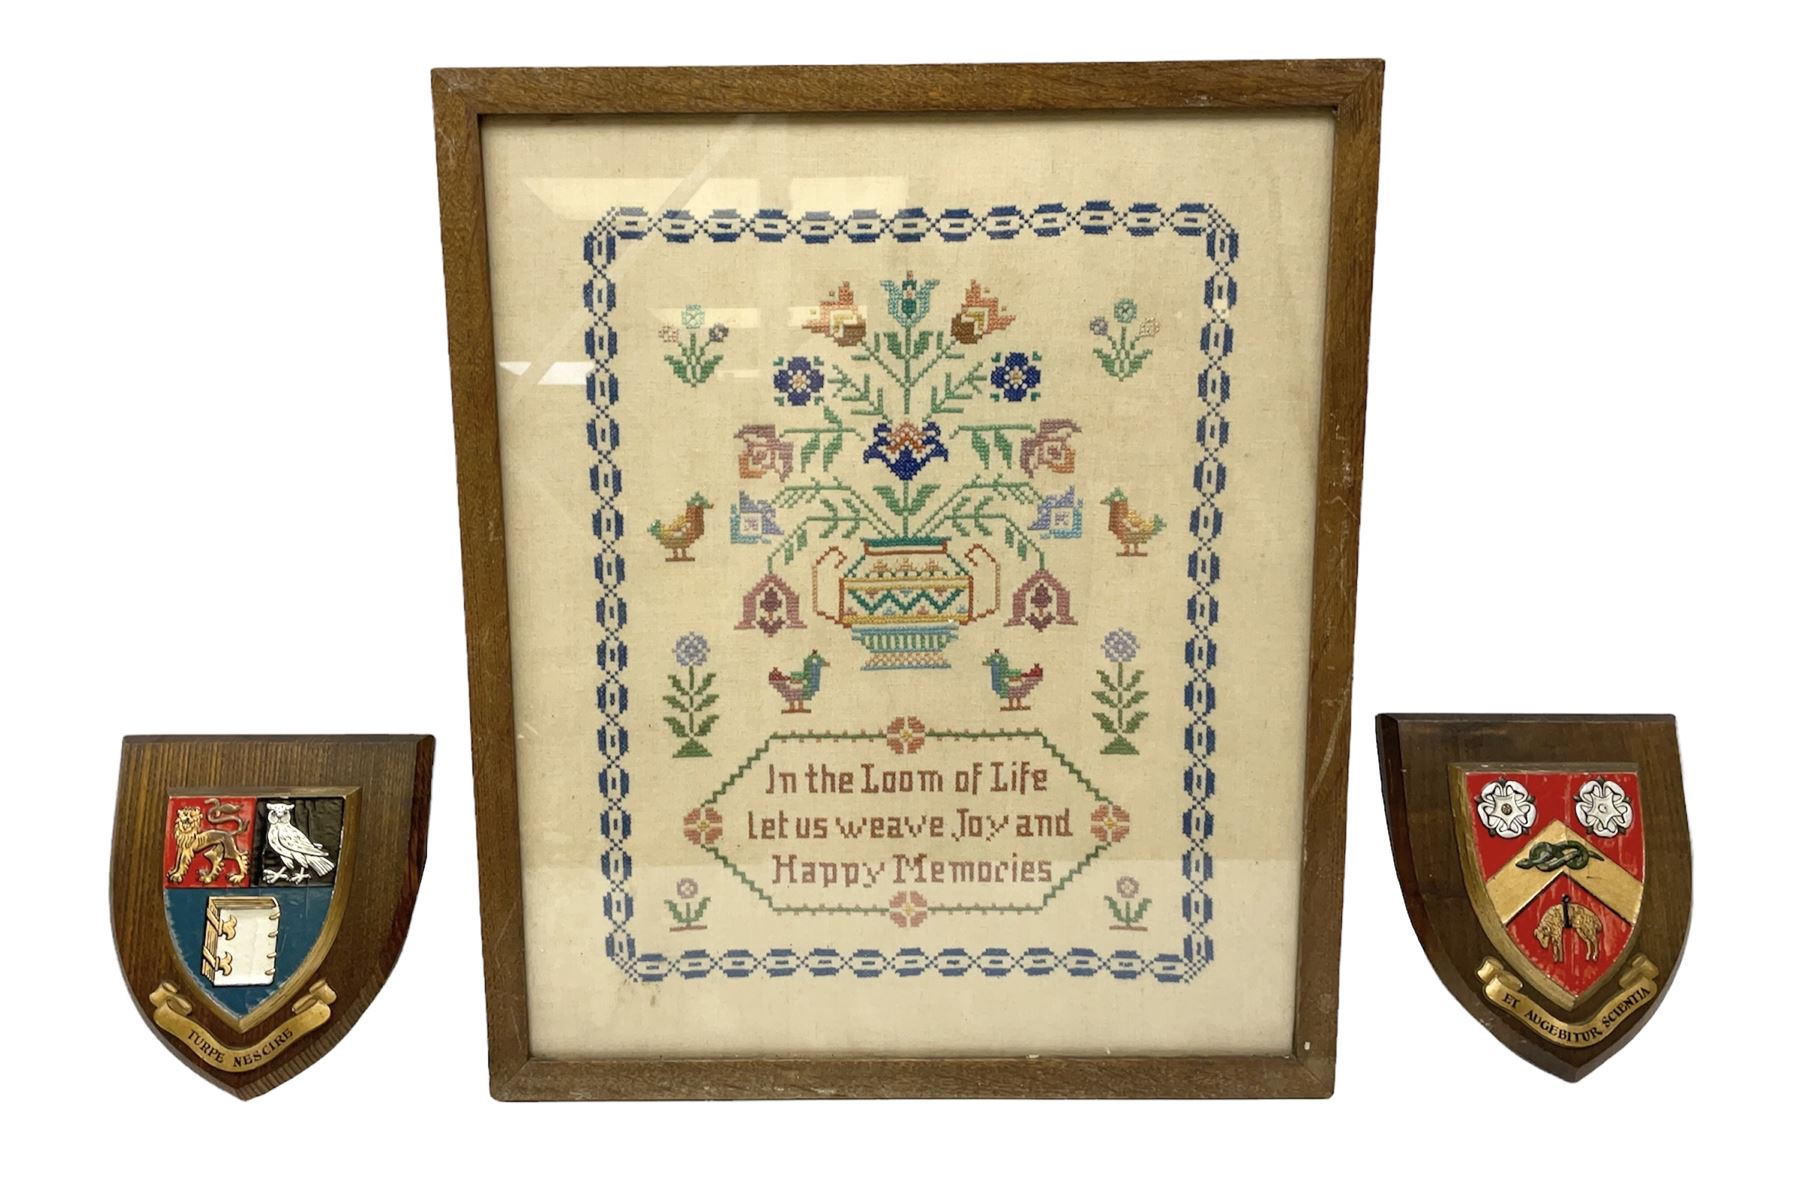 Framed sampler and two armorial plaques